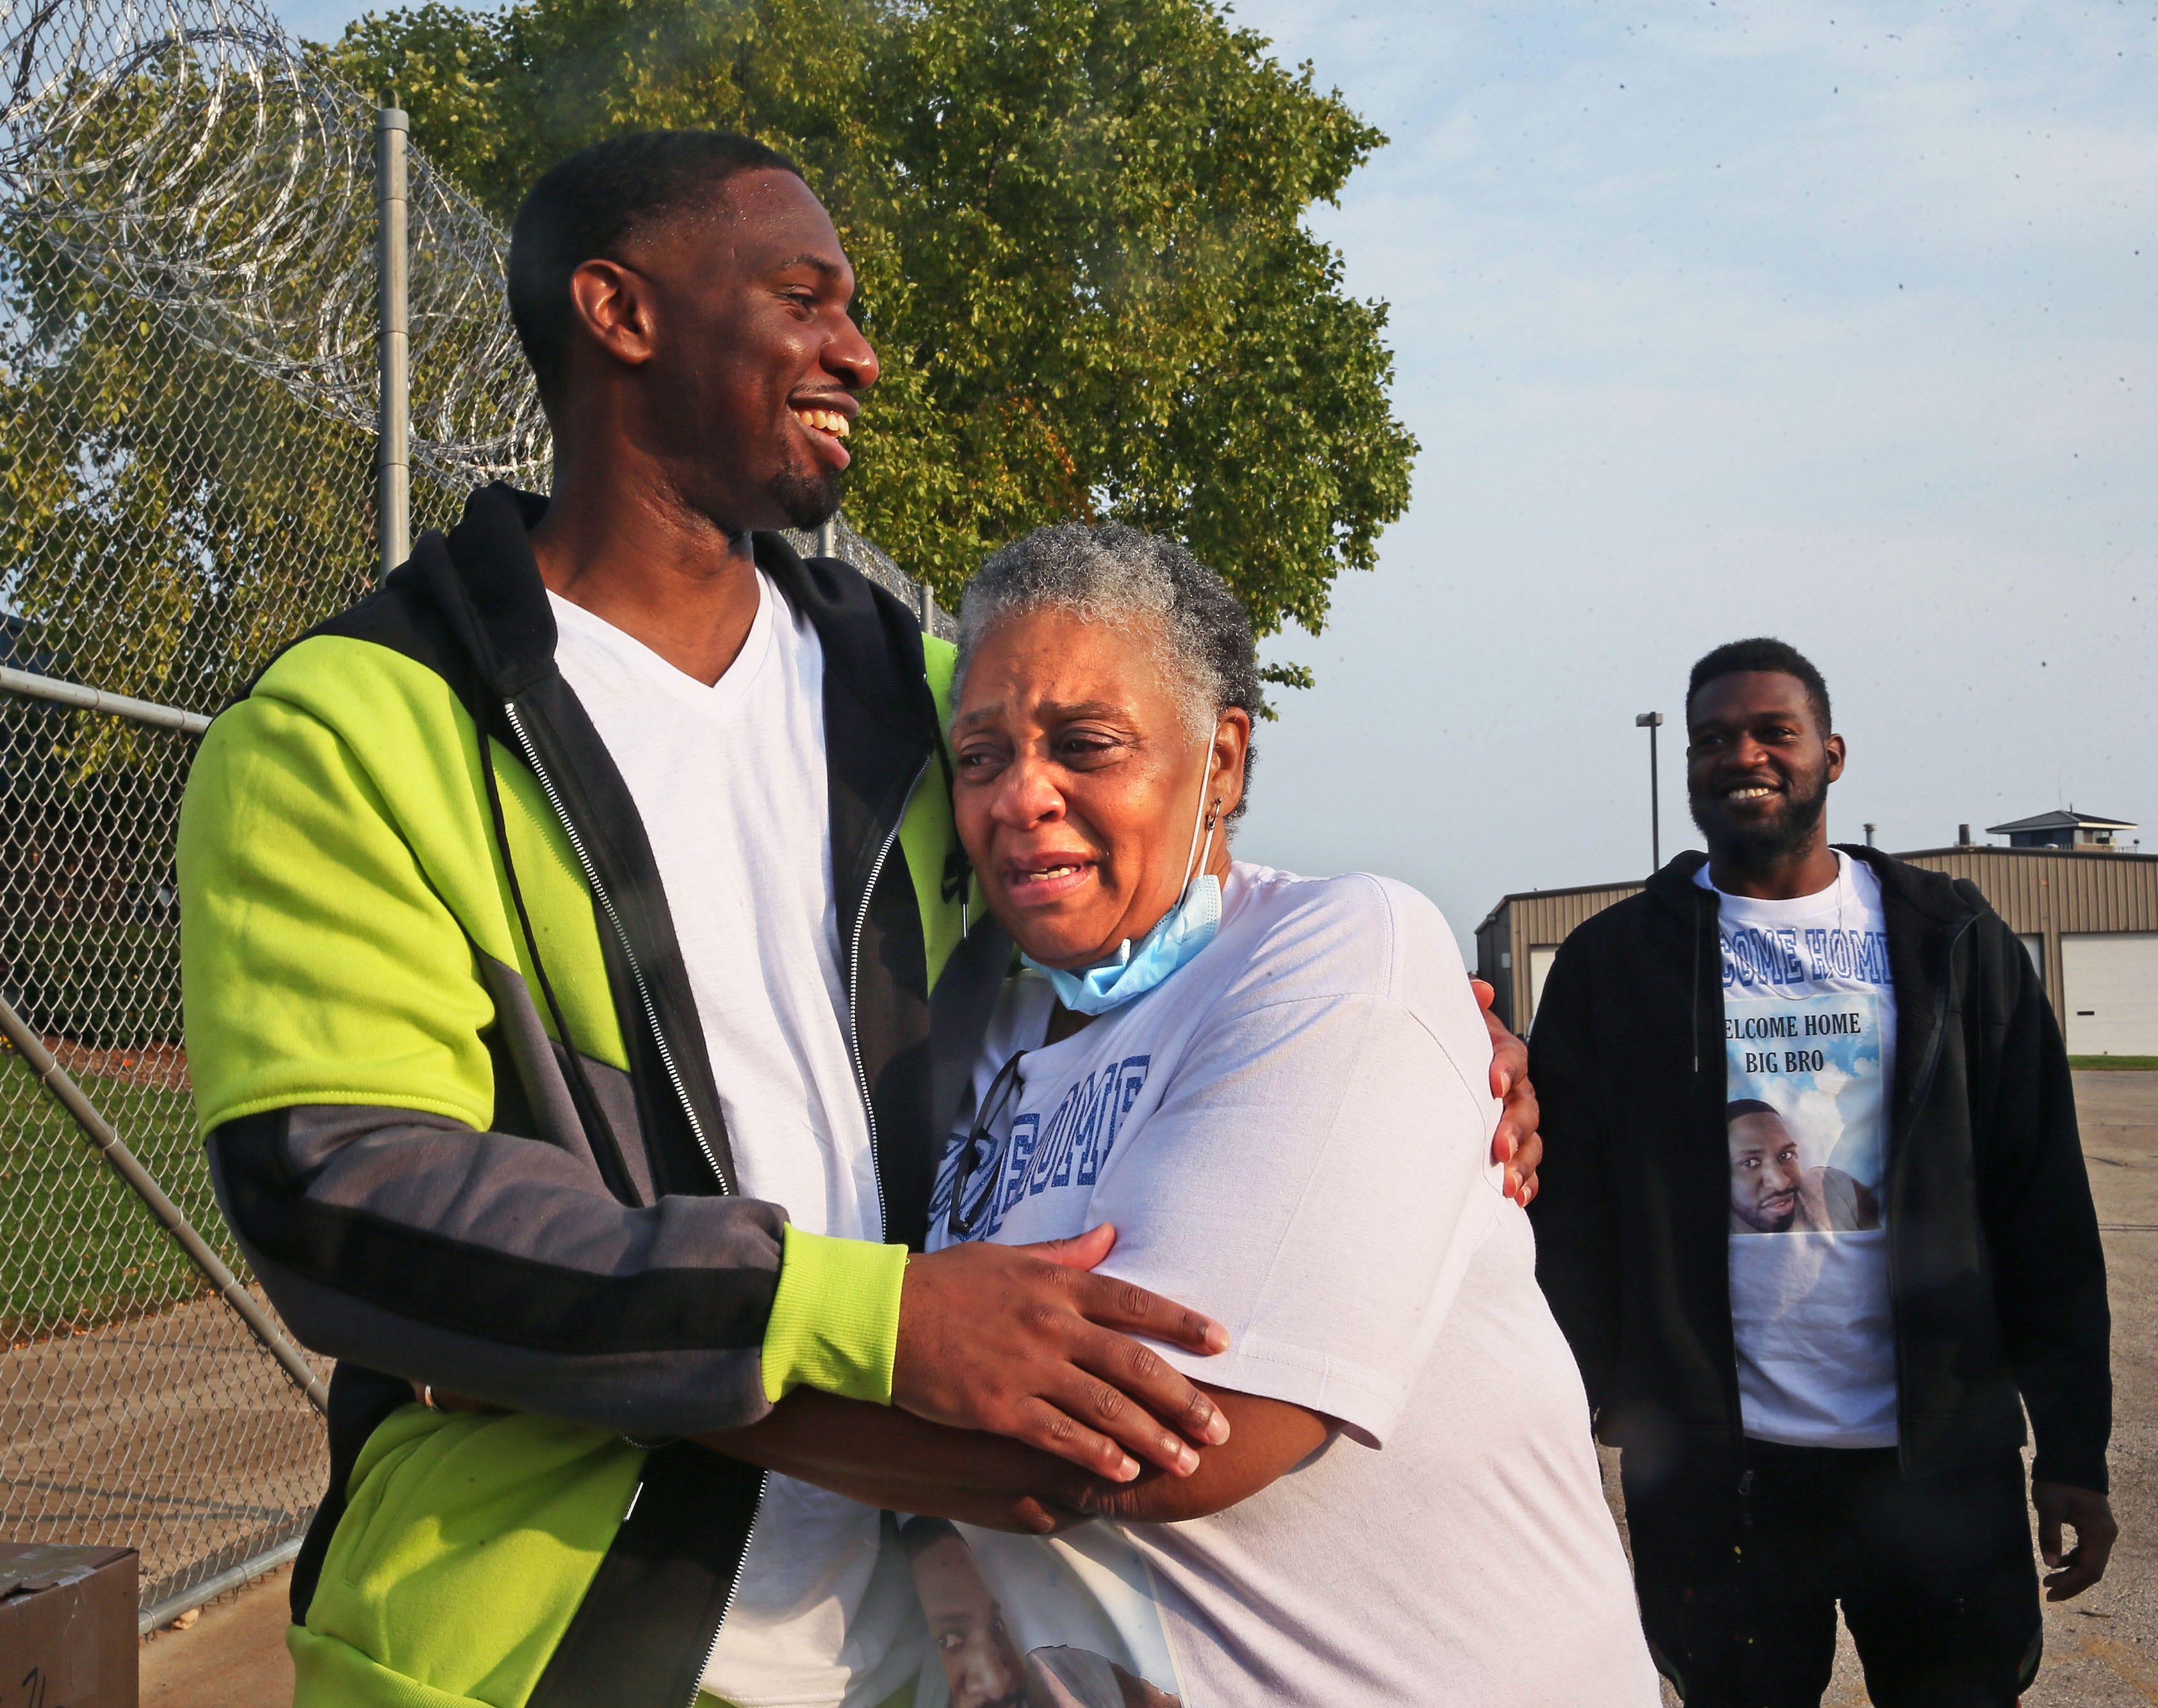 Doris Williams, 65, center, is overcome with emotion when her son Marlin Dixon, left, is released from the John C. Burke Correctional Center while his brother Alex Dixon watches.